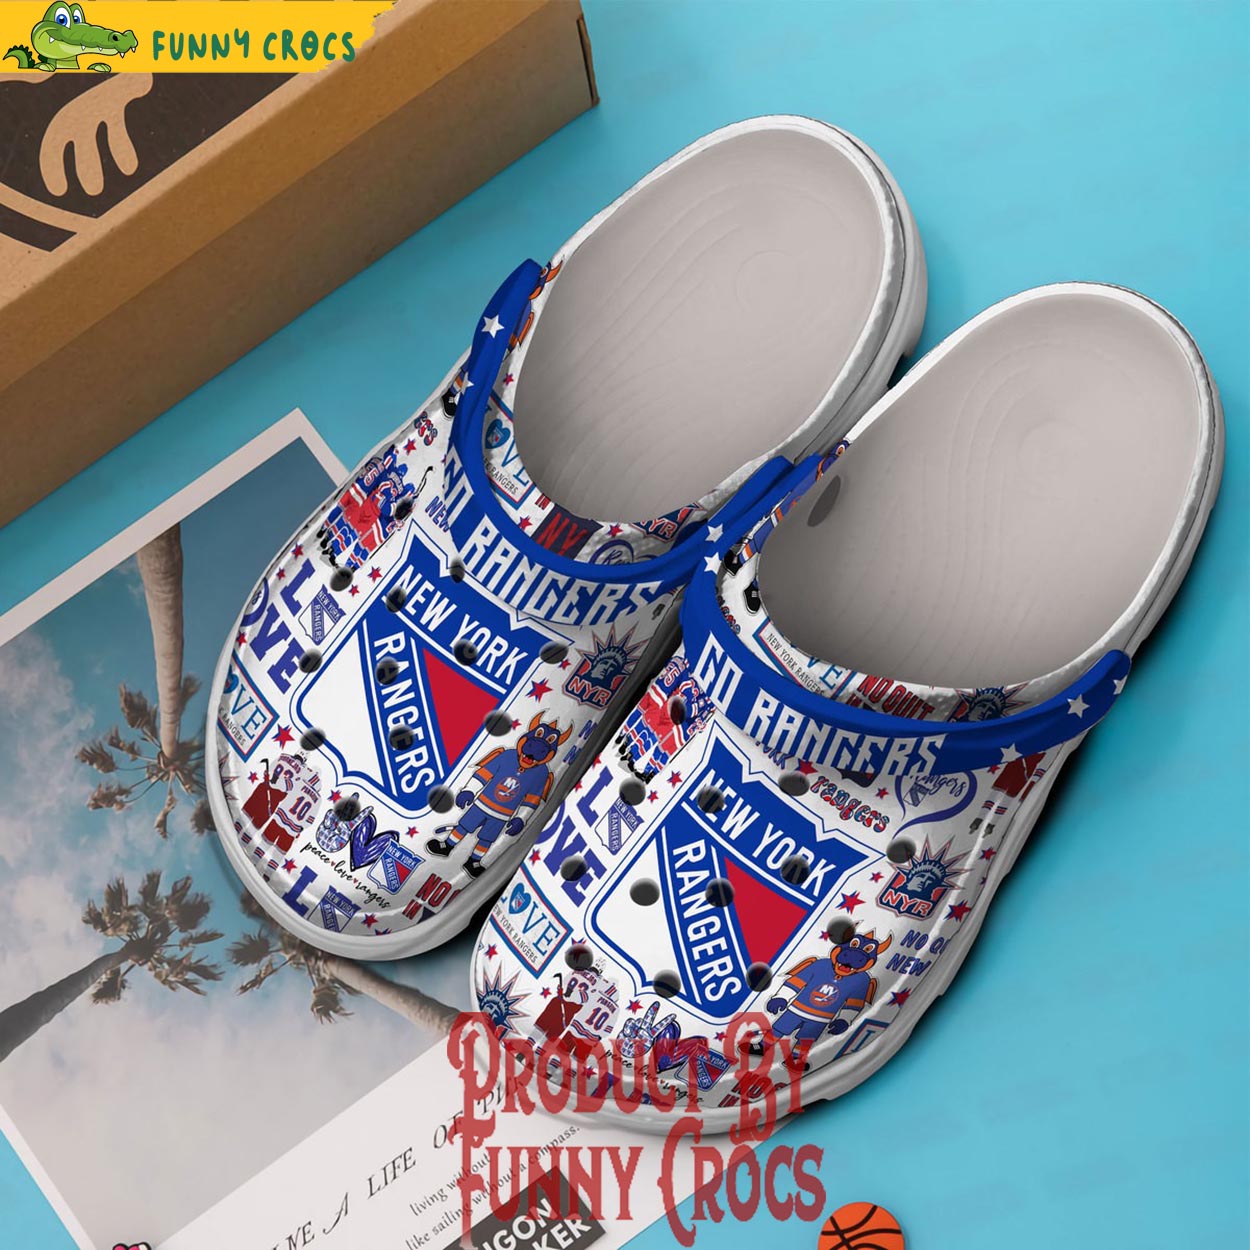 No Quit In New York Rangers Crocs - Discover Comfort And Style Clog ...